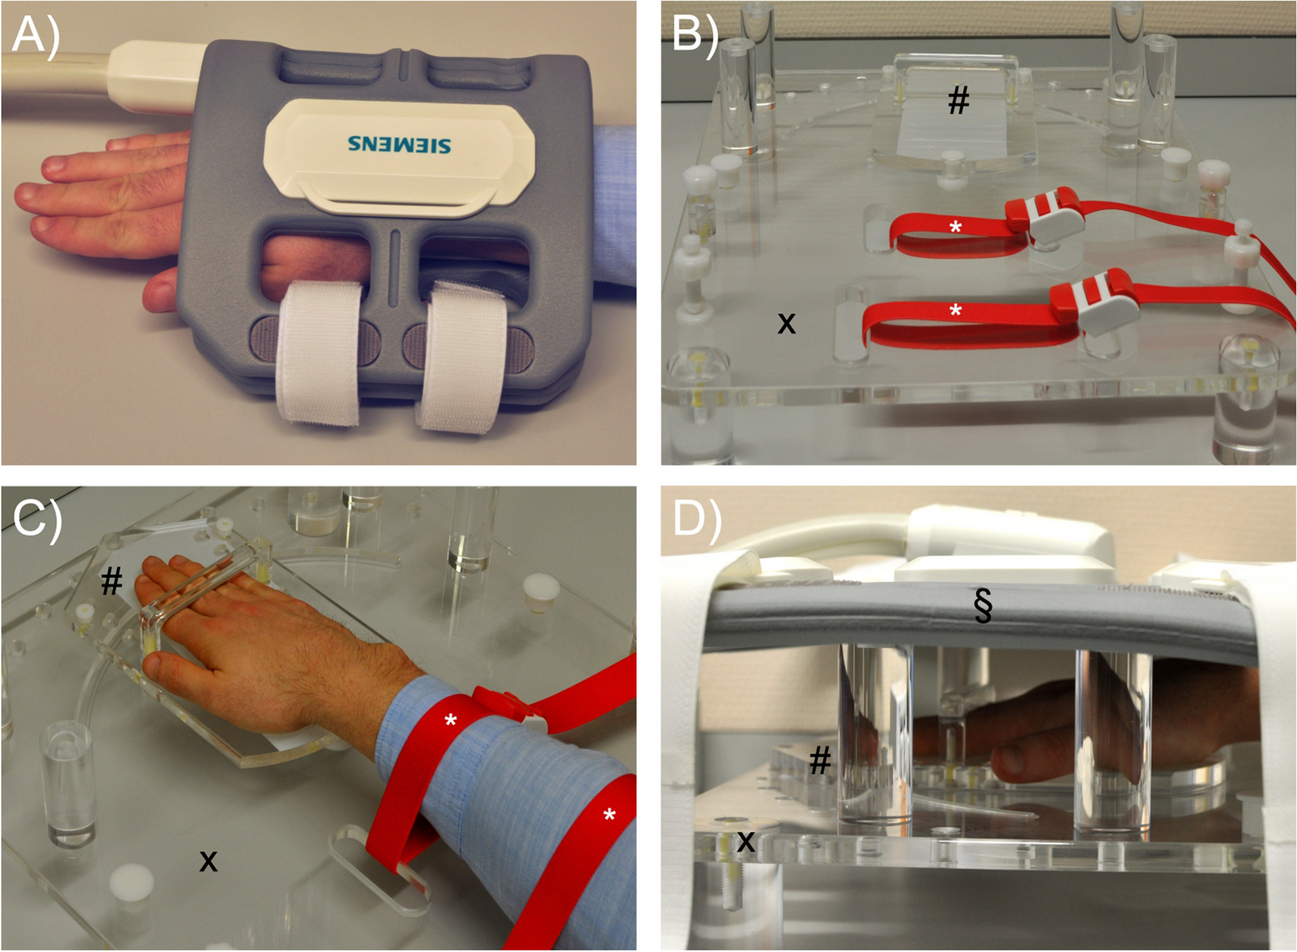 Dynamic assessment of scapholunate ligament status by real-time magnetic resonance imaging: an exploratory clinical study